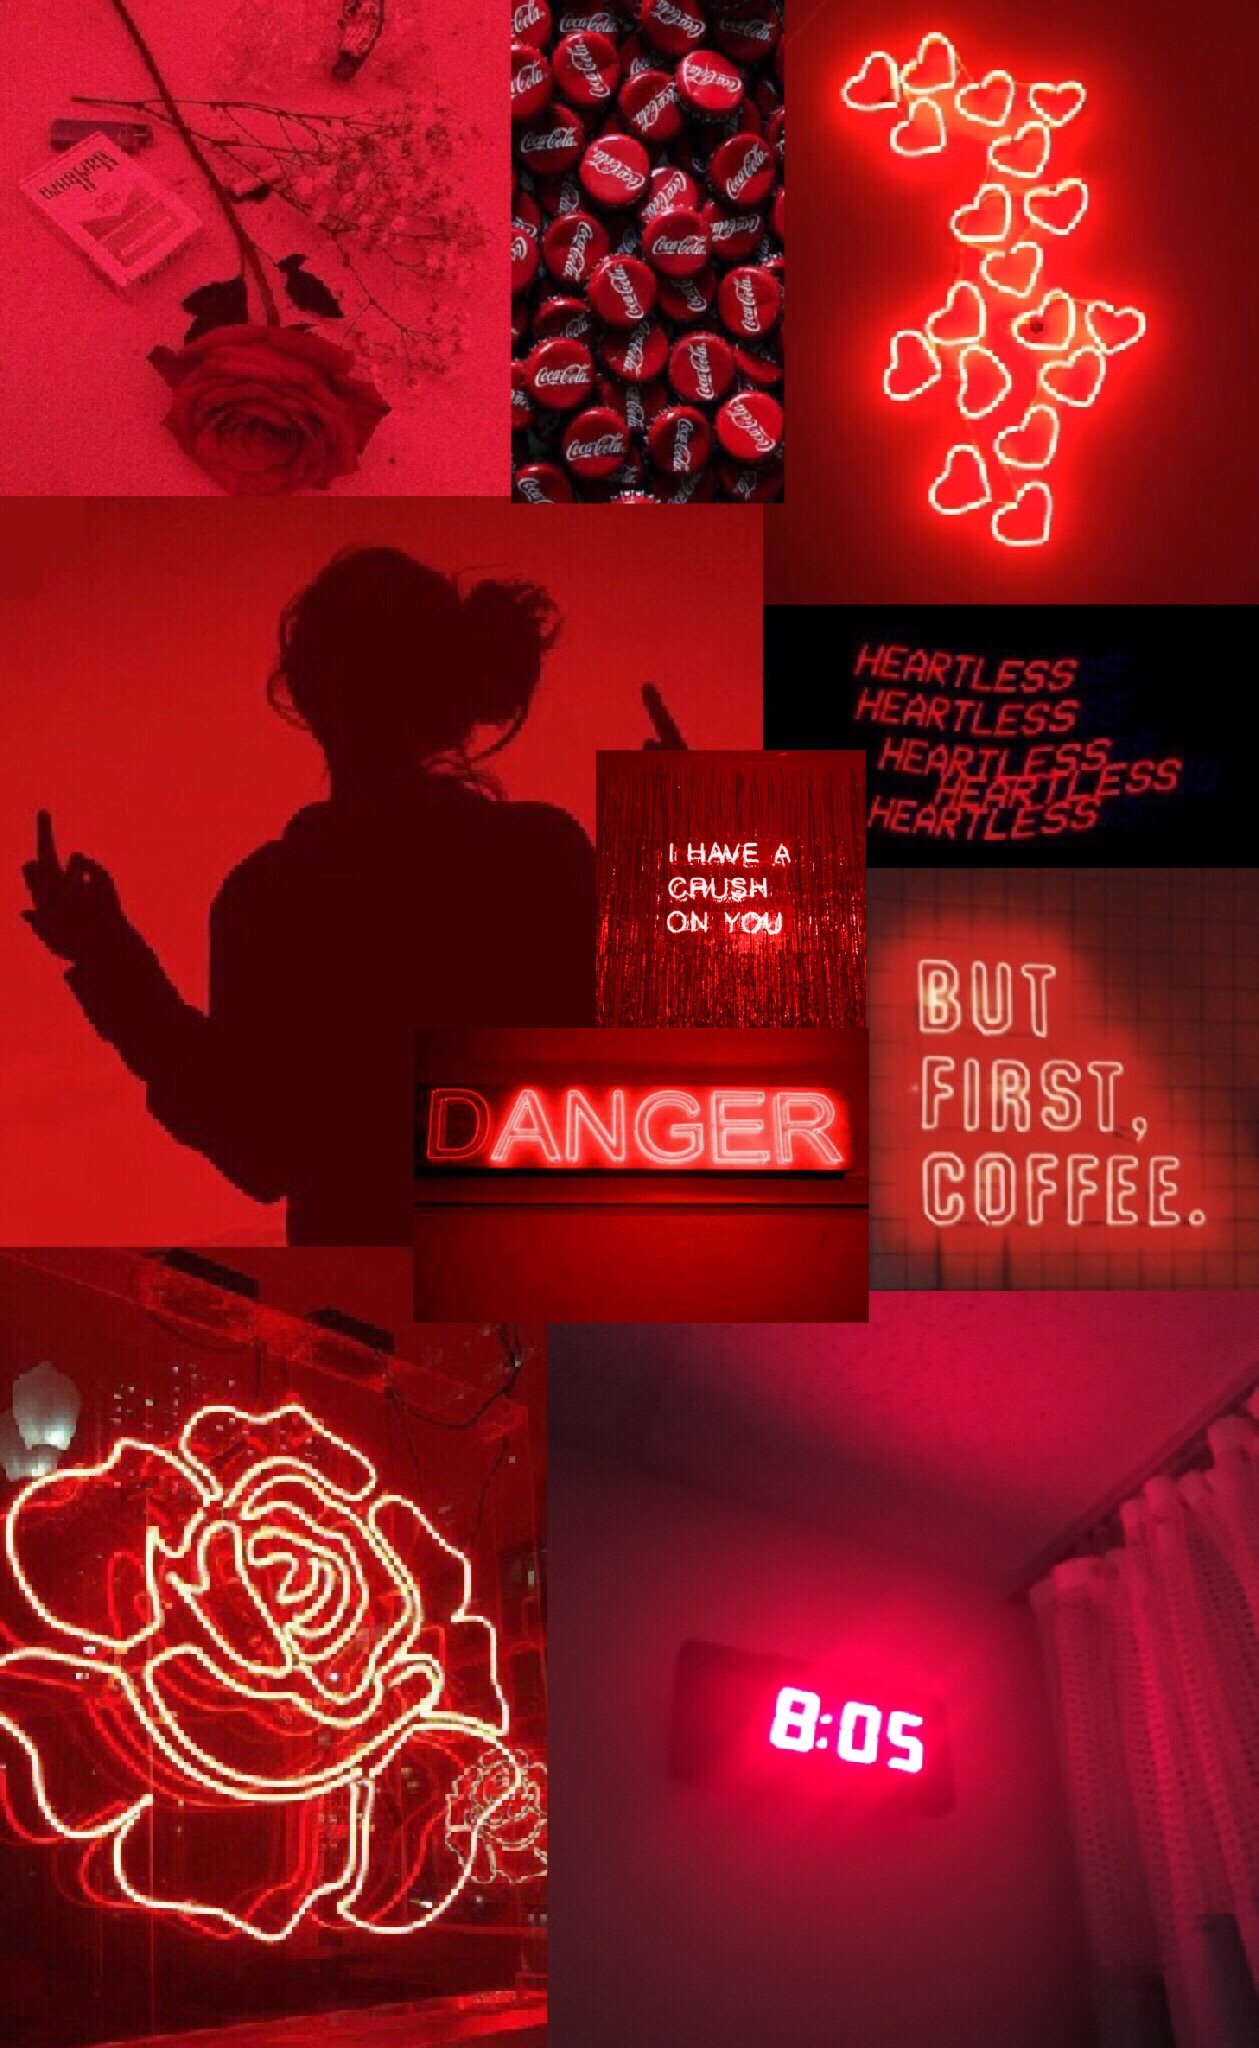 freetoedit tumblr aesthetic red image by @daestheticwall